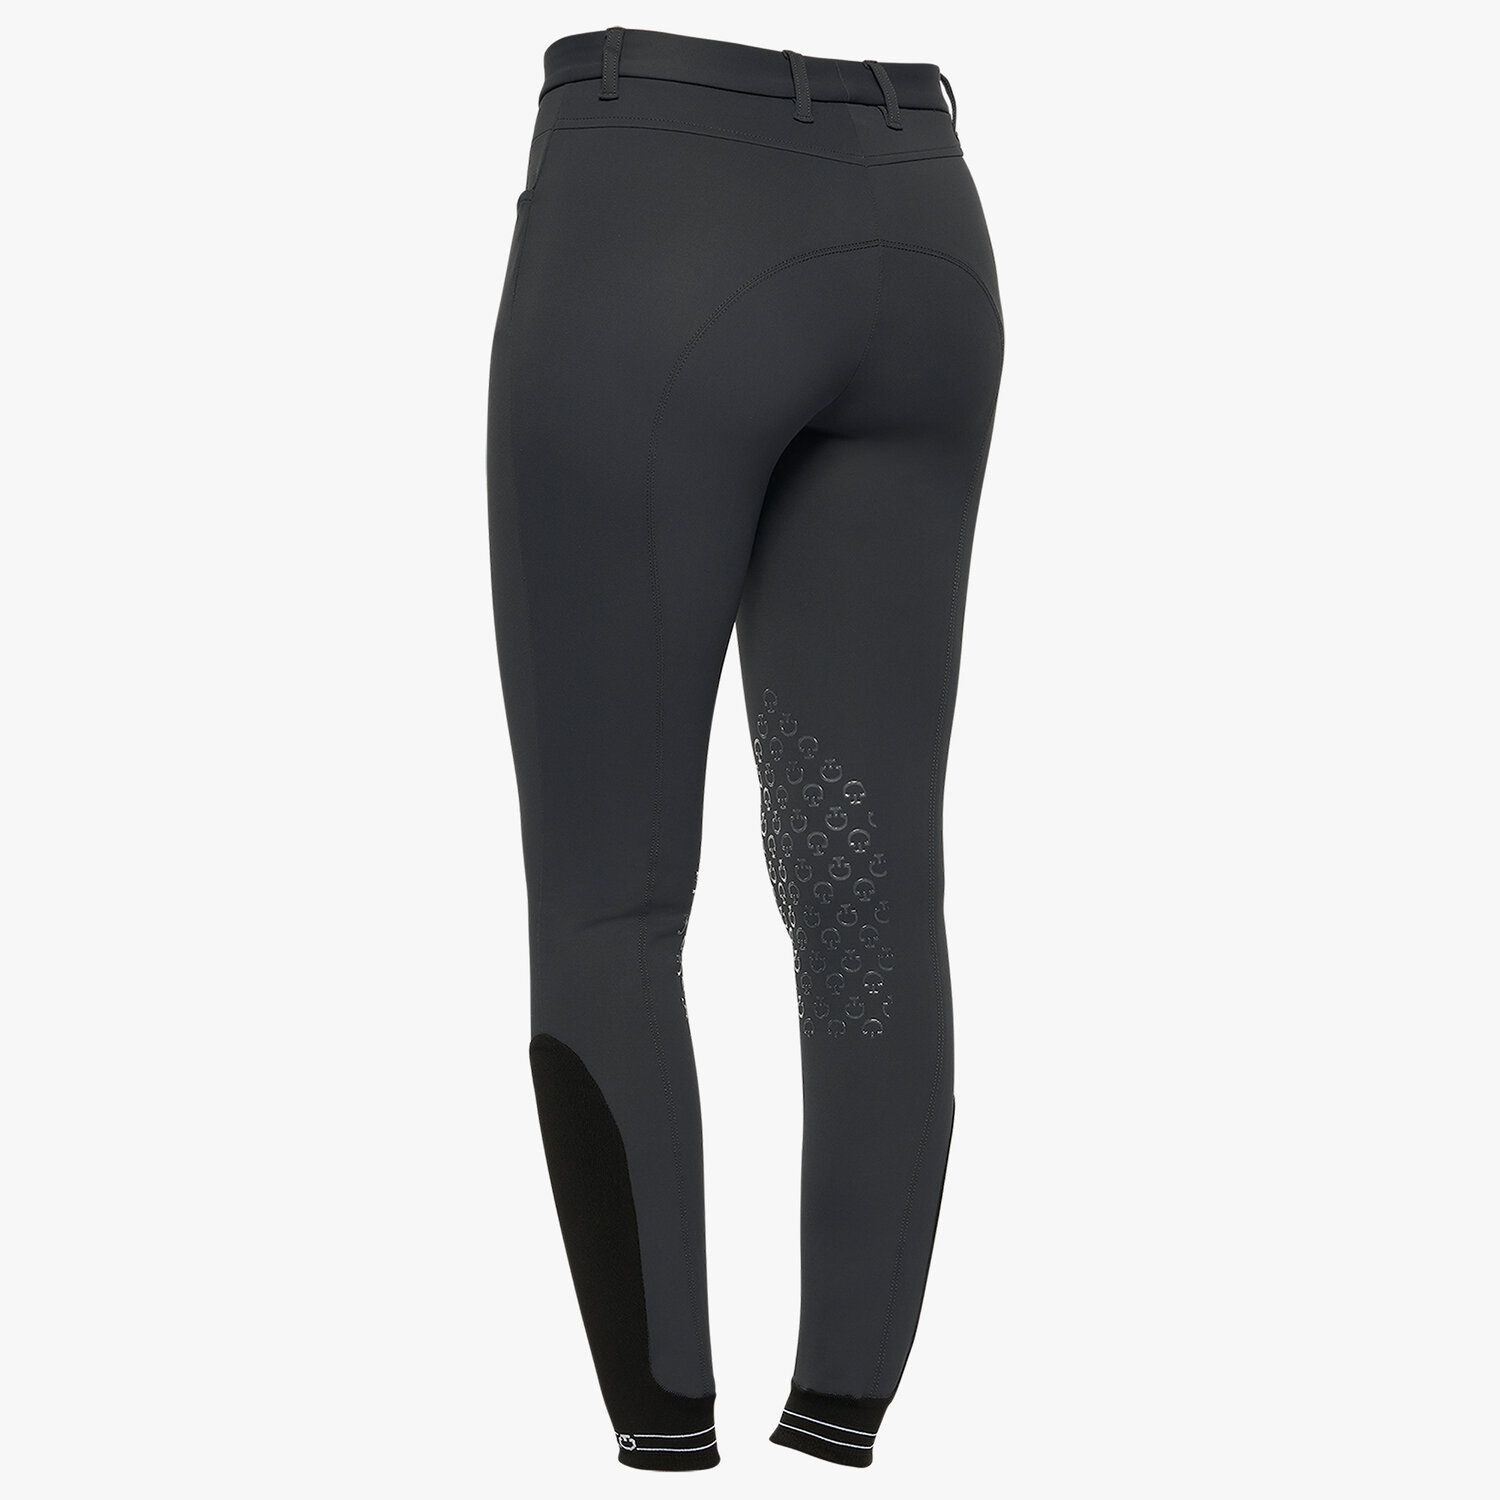 Cavalleria Toscana Women's knee grip breeches with perforated logo tape CHARCOAL GREY-3